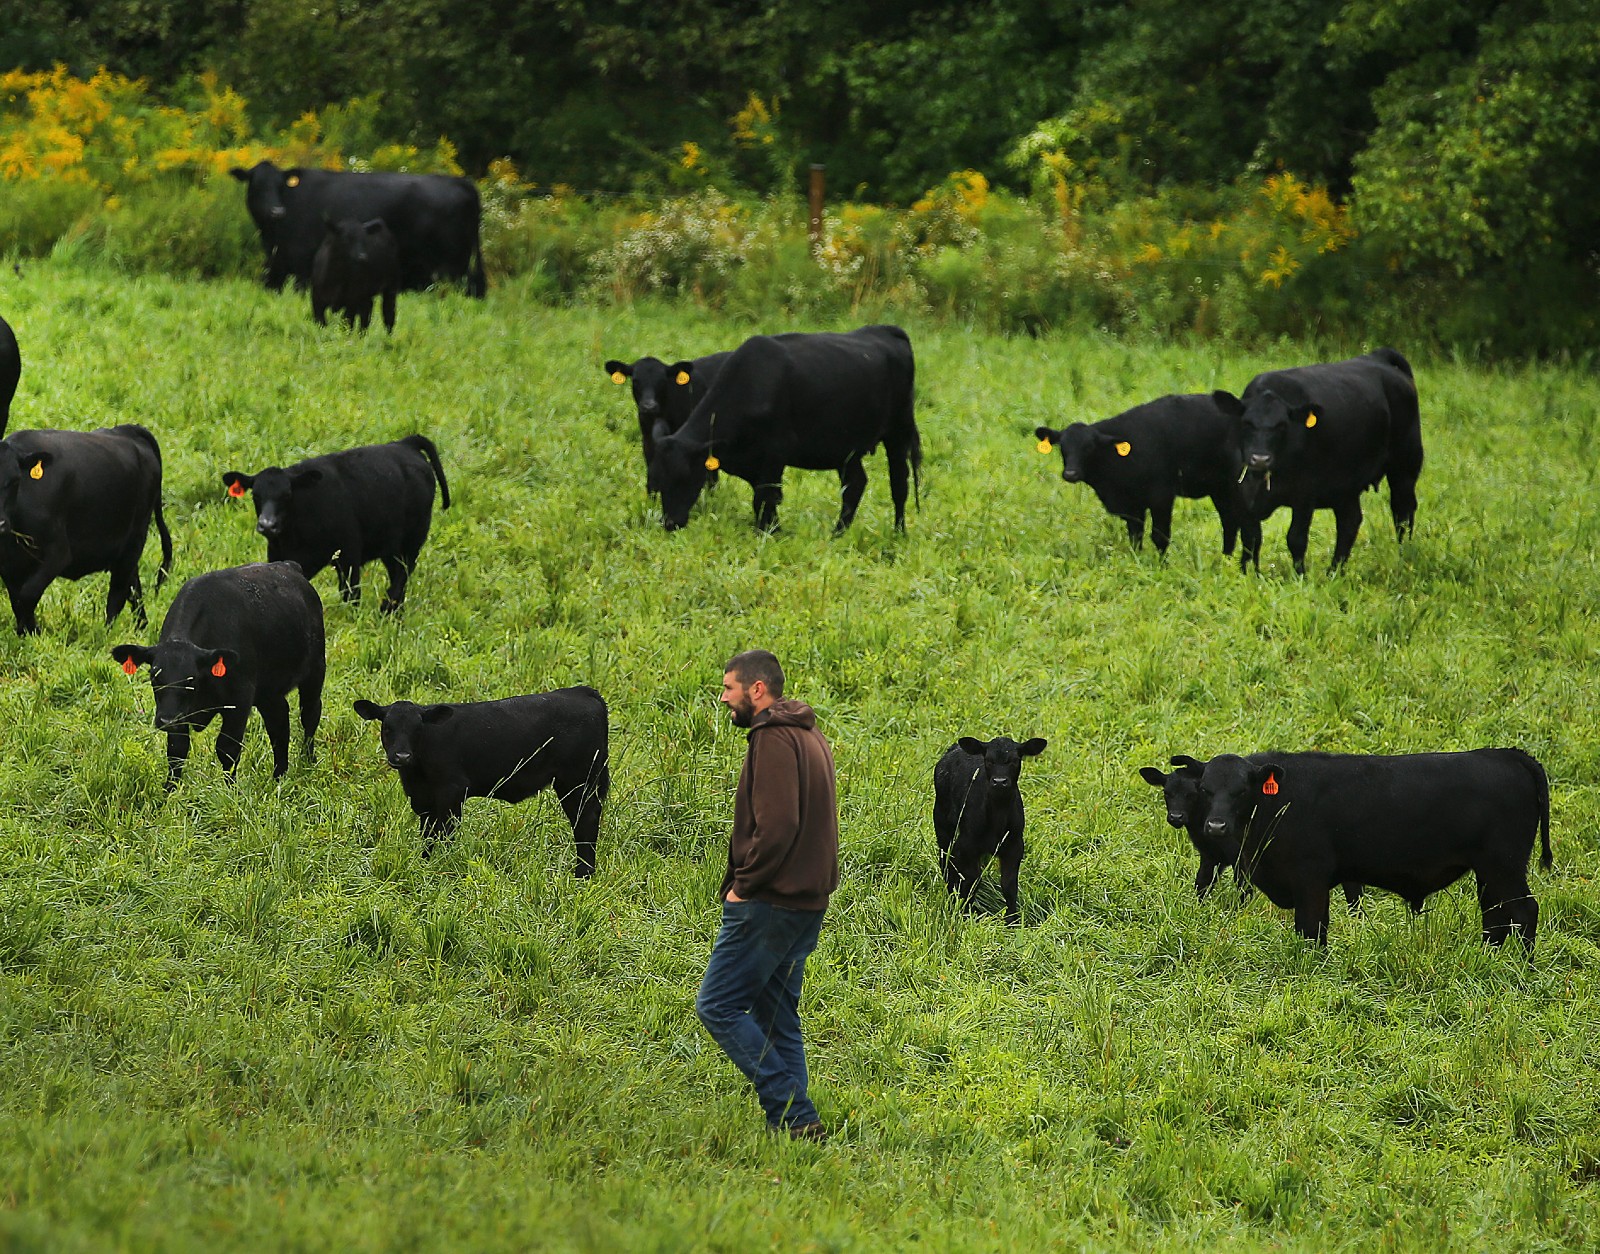 A man in a hoodie stands in a green field among black cows.